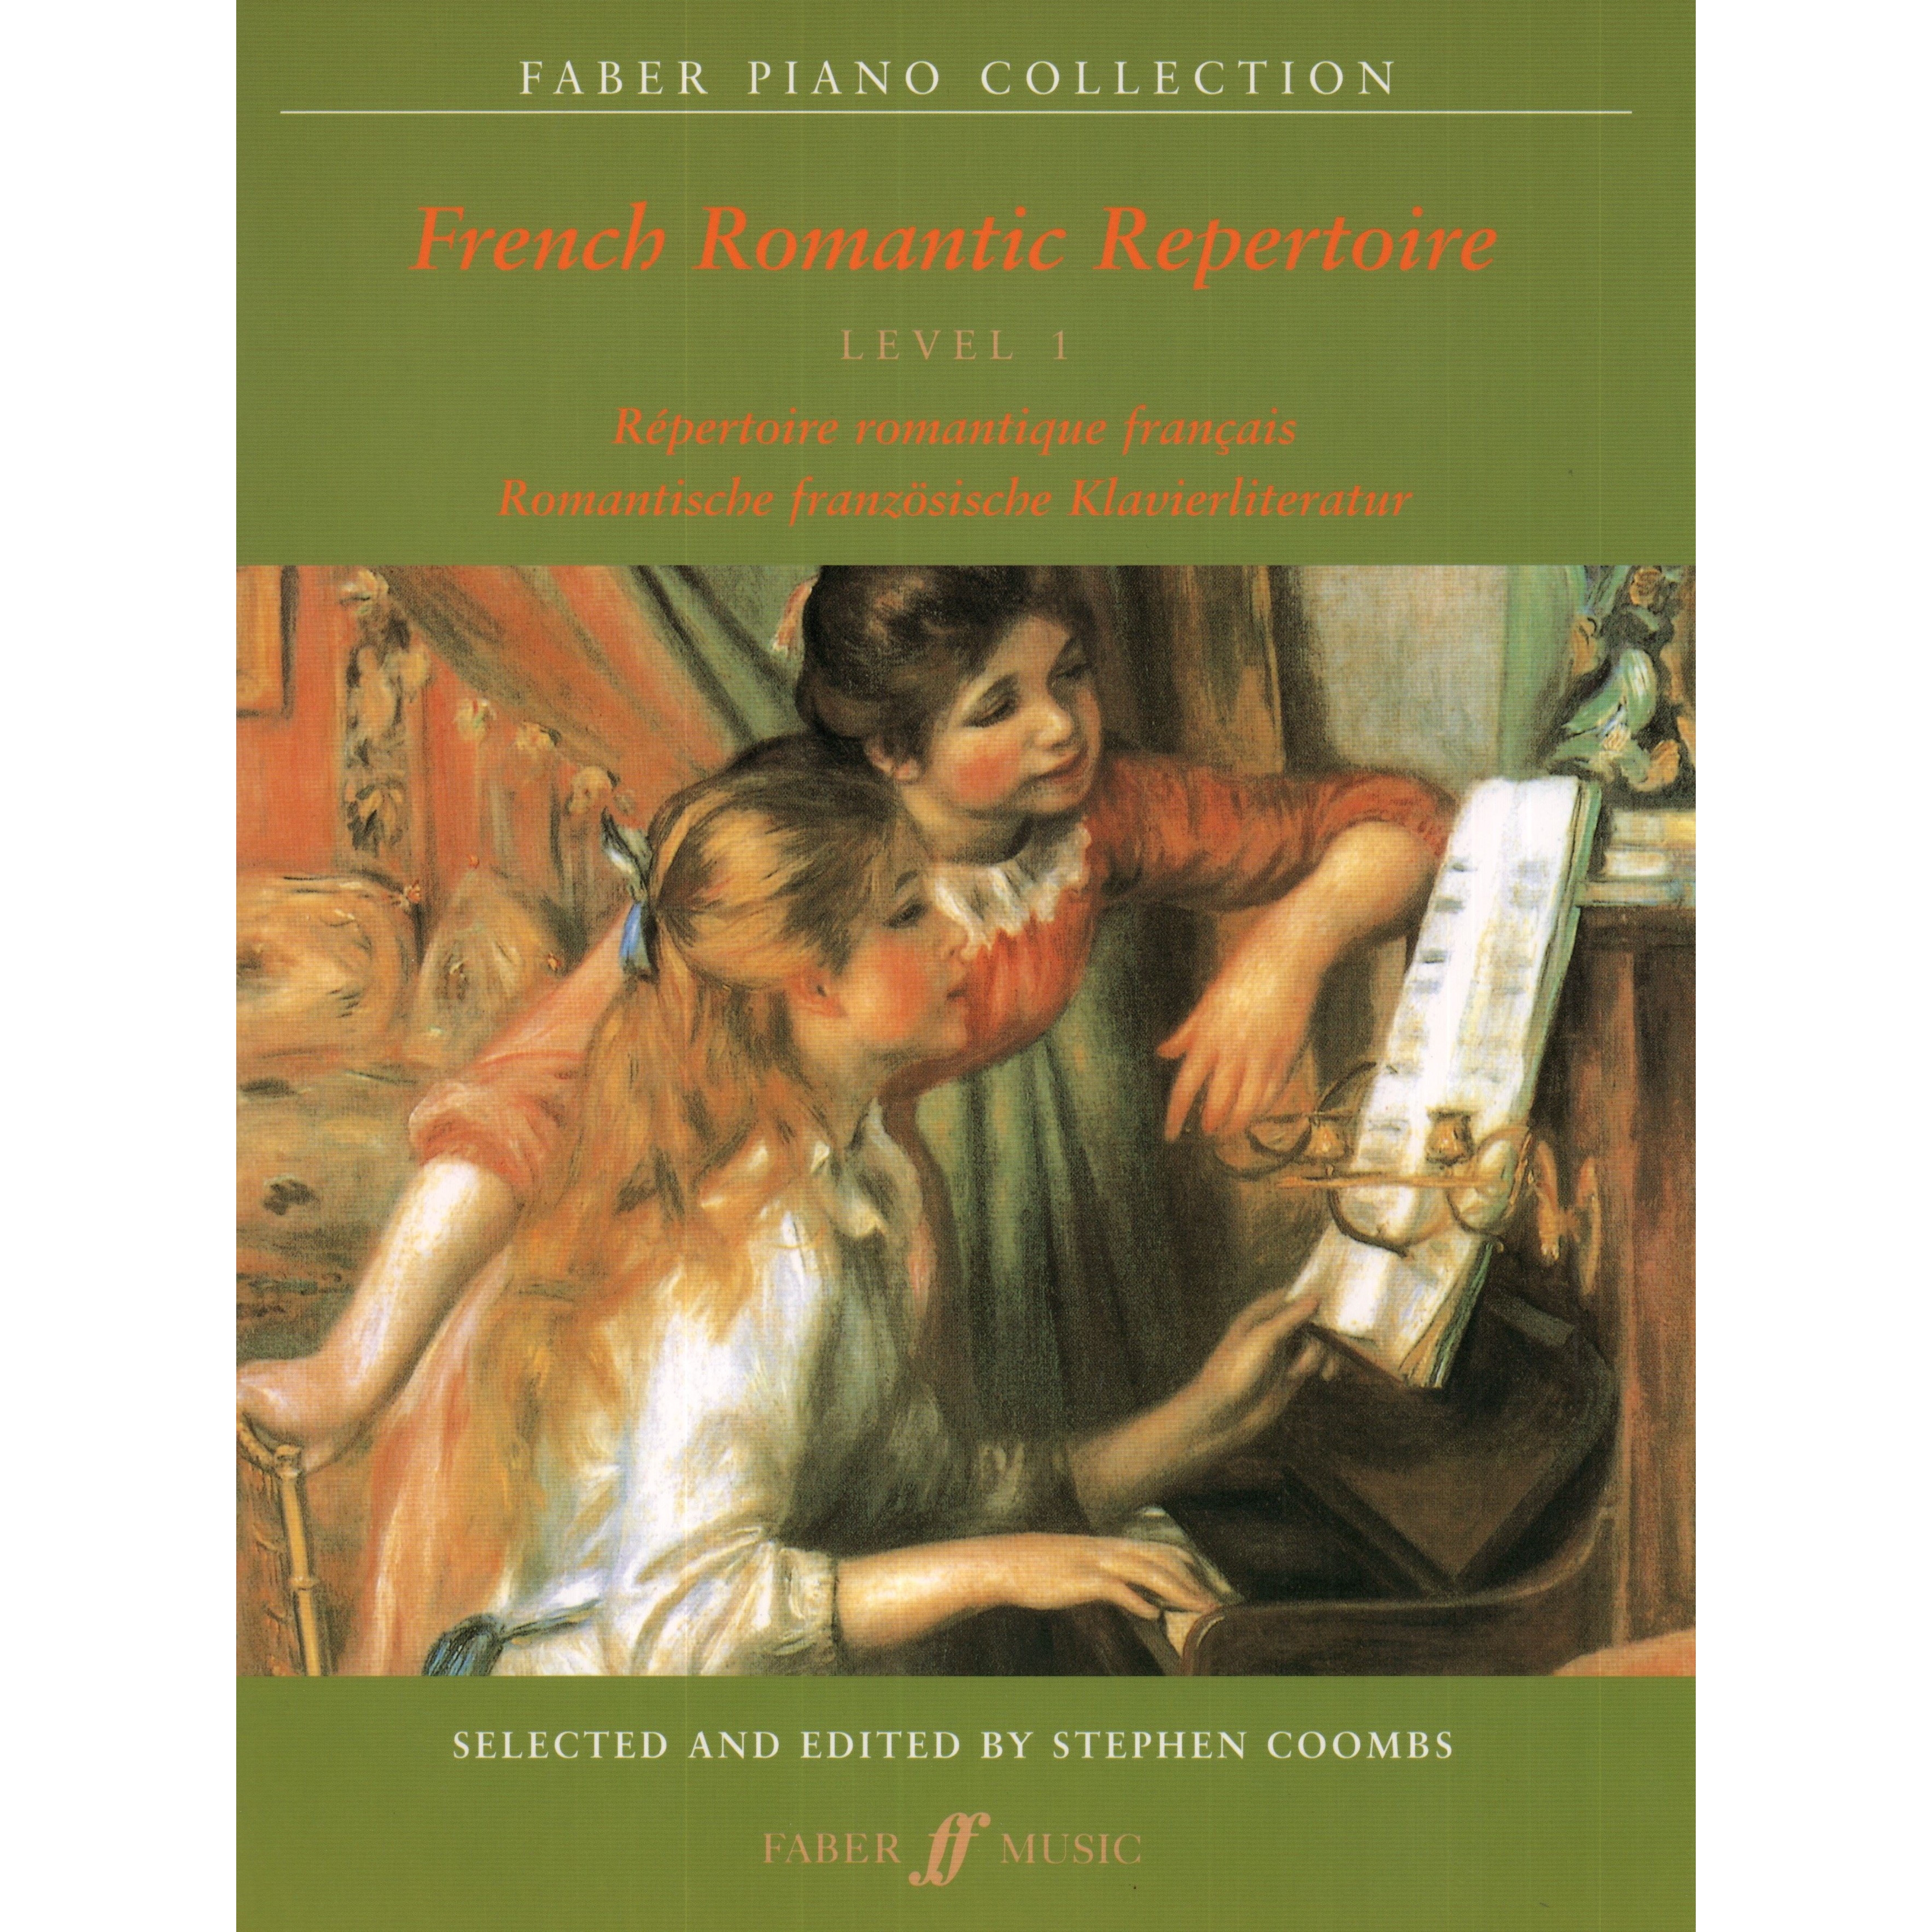 French Romantic Repertoire for Piano, Level 1 - S. Coombs. Just Flutes